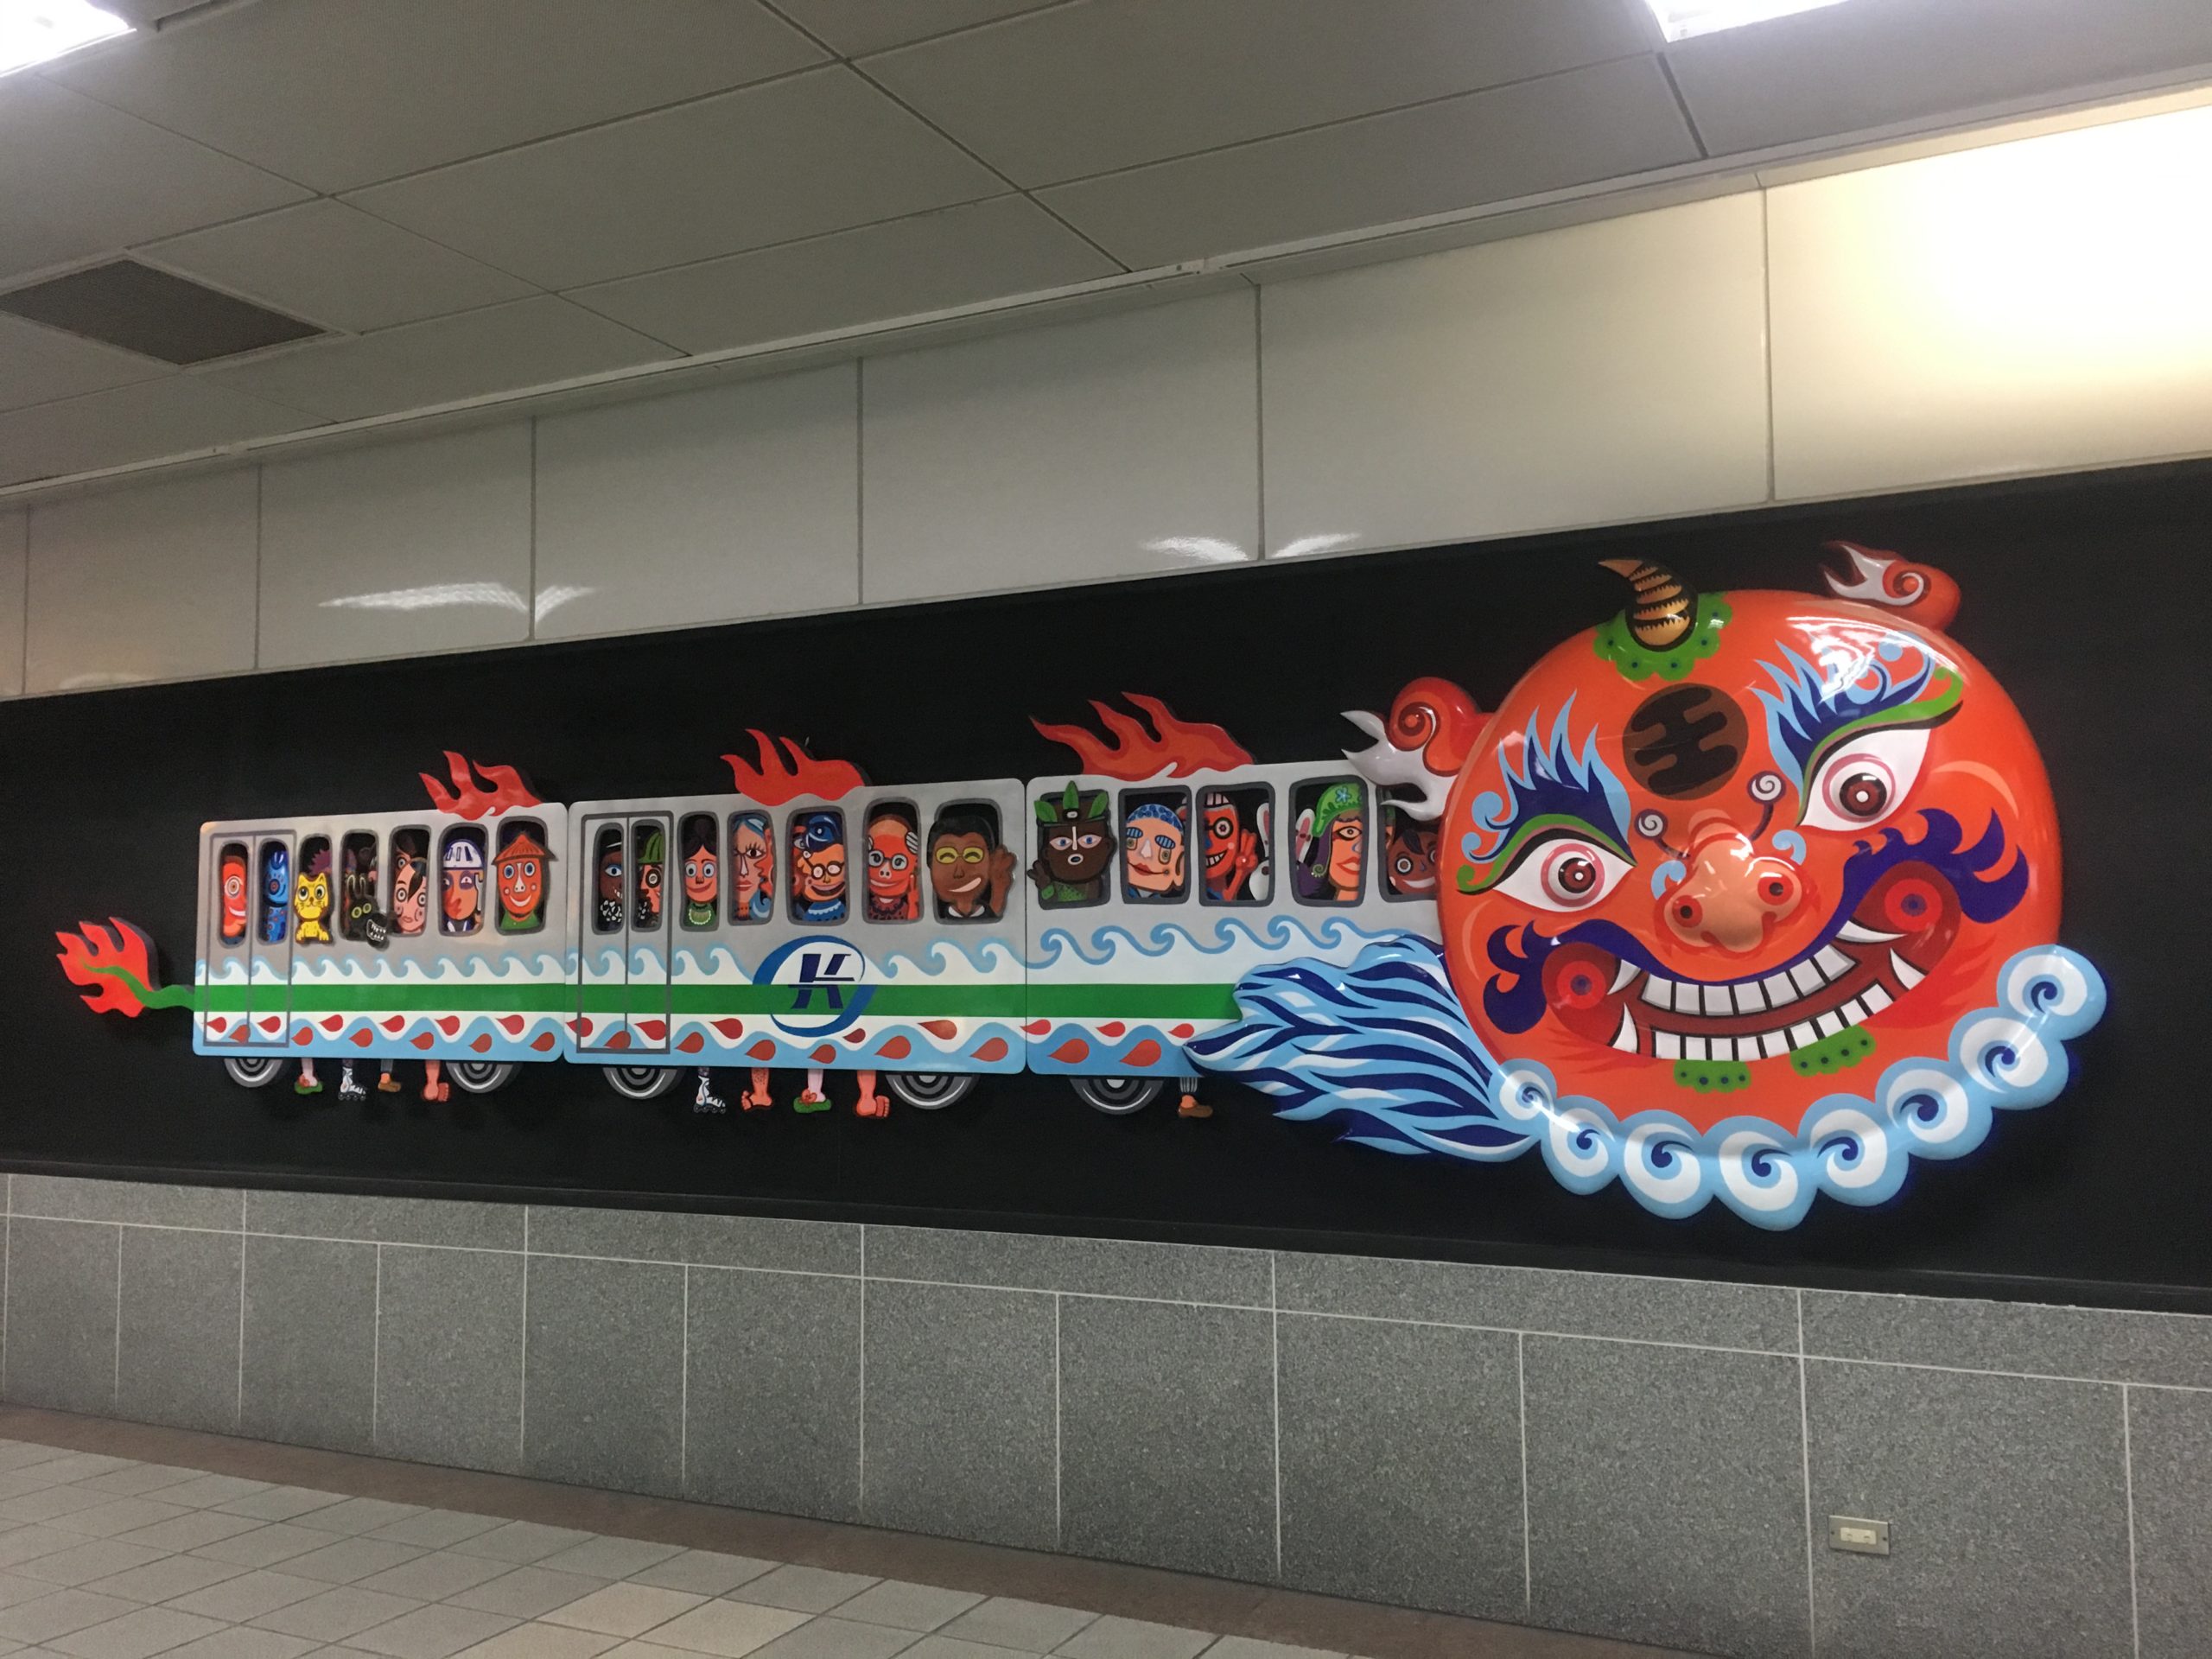 encouraging train at Kaohsiung metro station